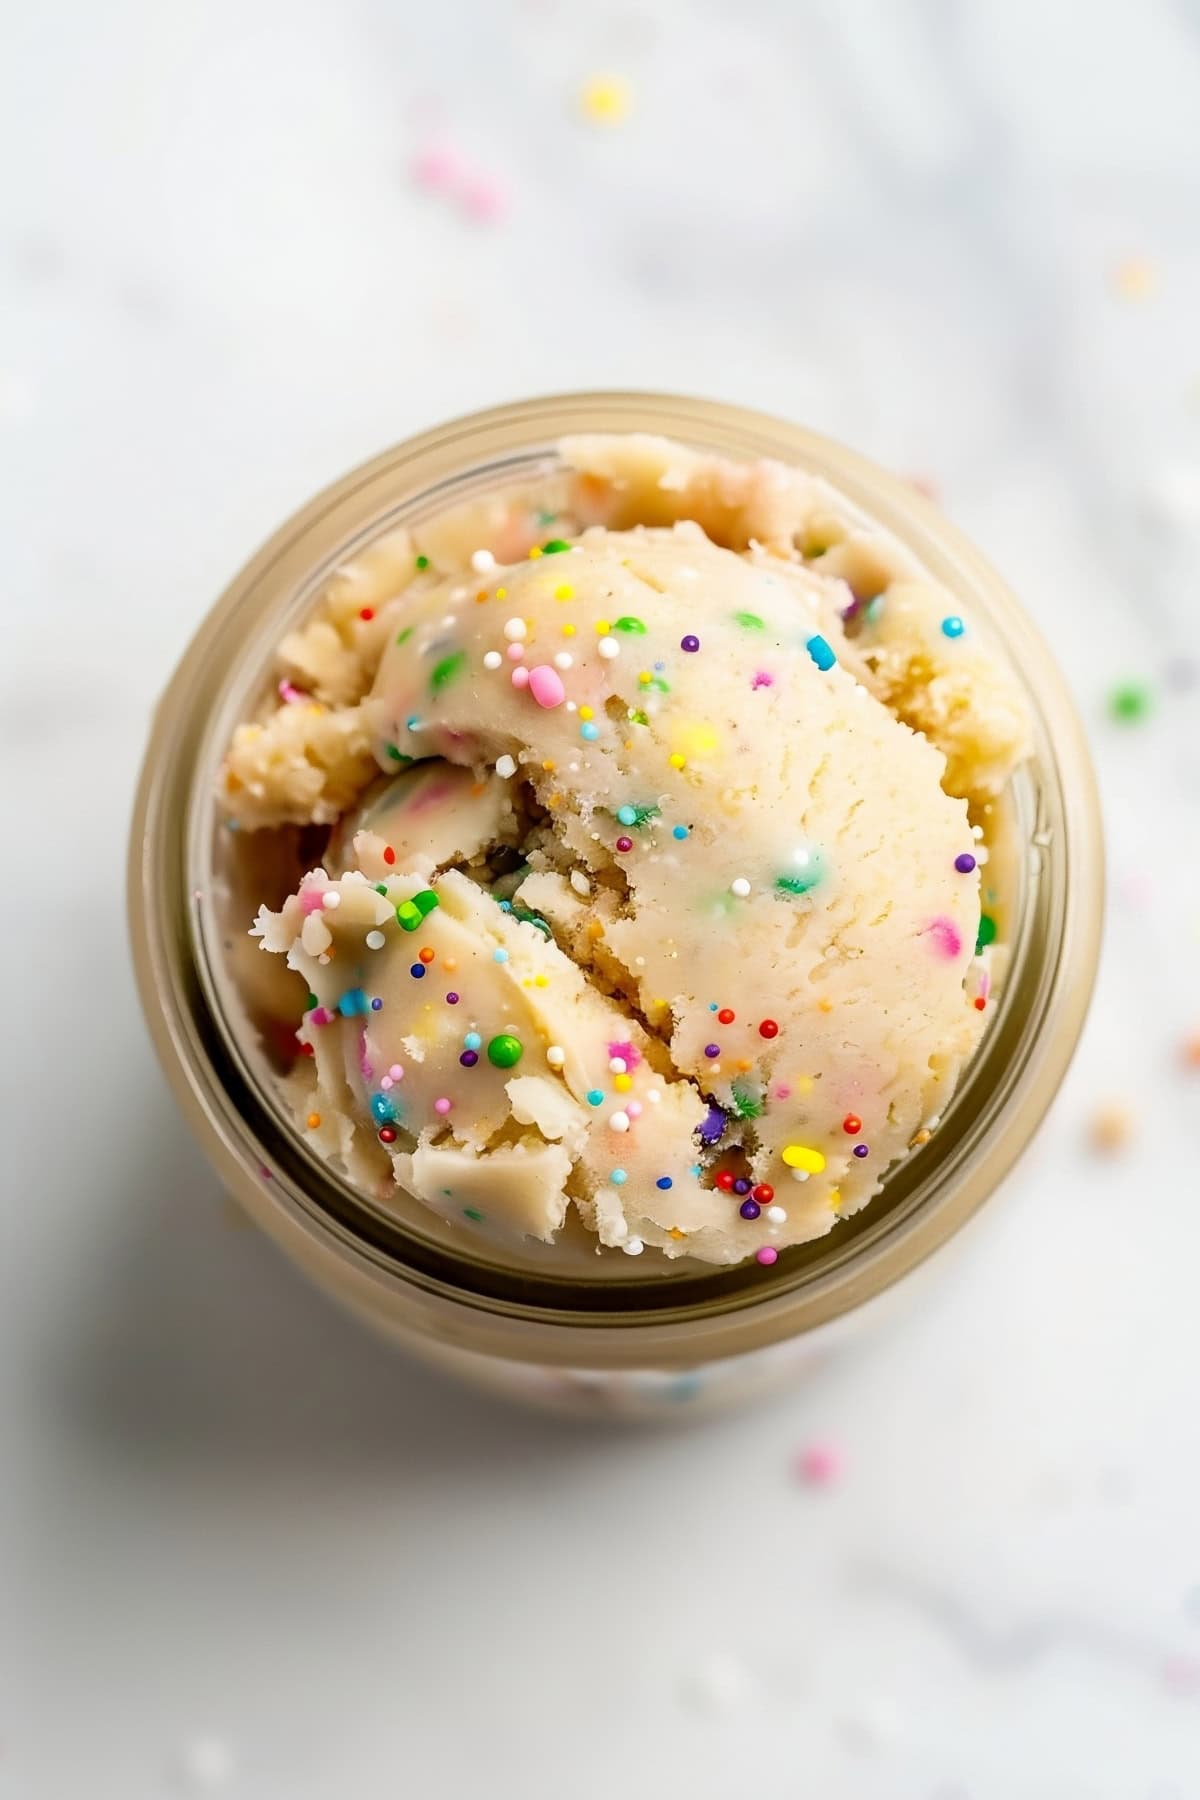 Fun edible sugar cookie dough, filled with sprinkles and ready to enjoy.